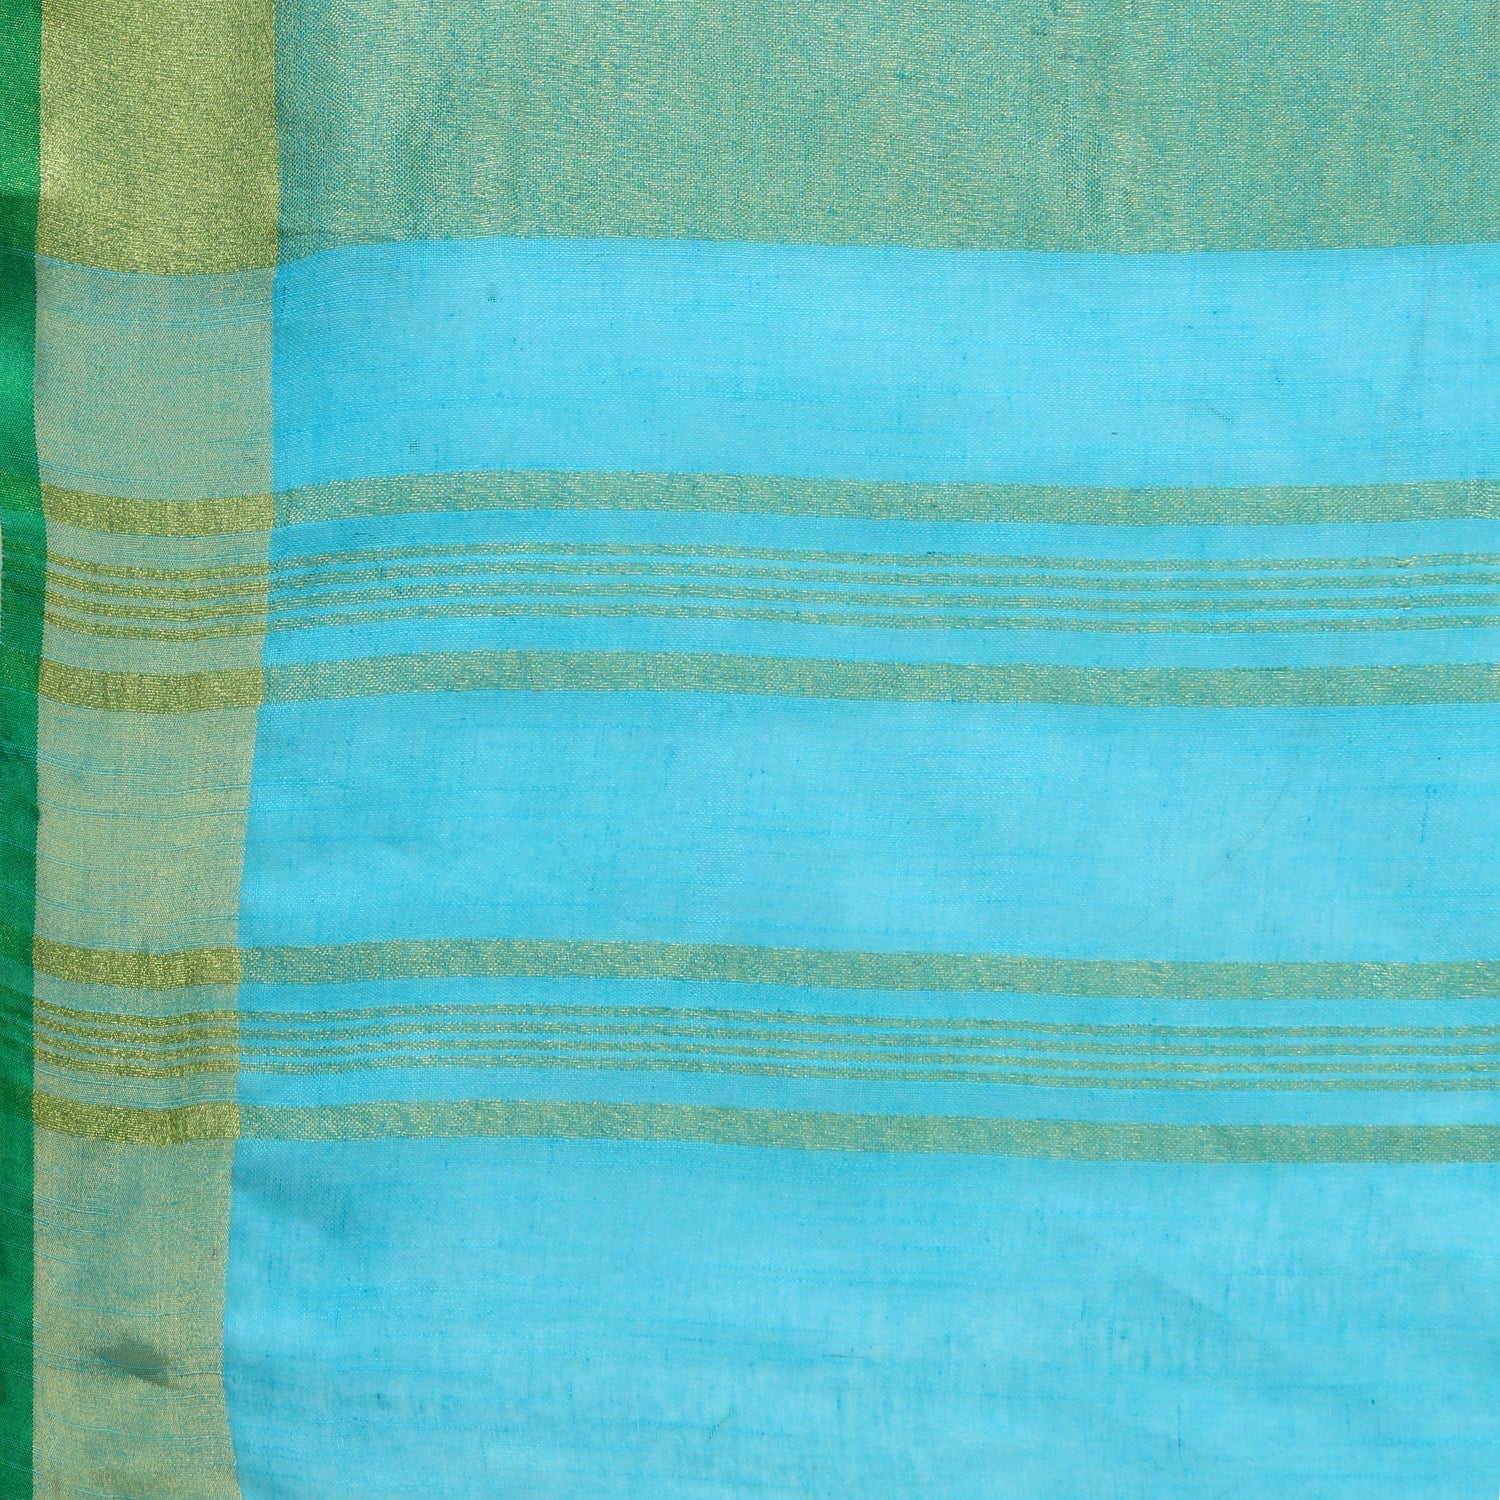 Women's self Woven Solid Textured Daily Wear Cotton Linen Sari With Blouse Piece (Sky Blue) - NIMIDHYA